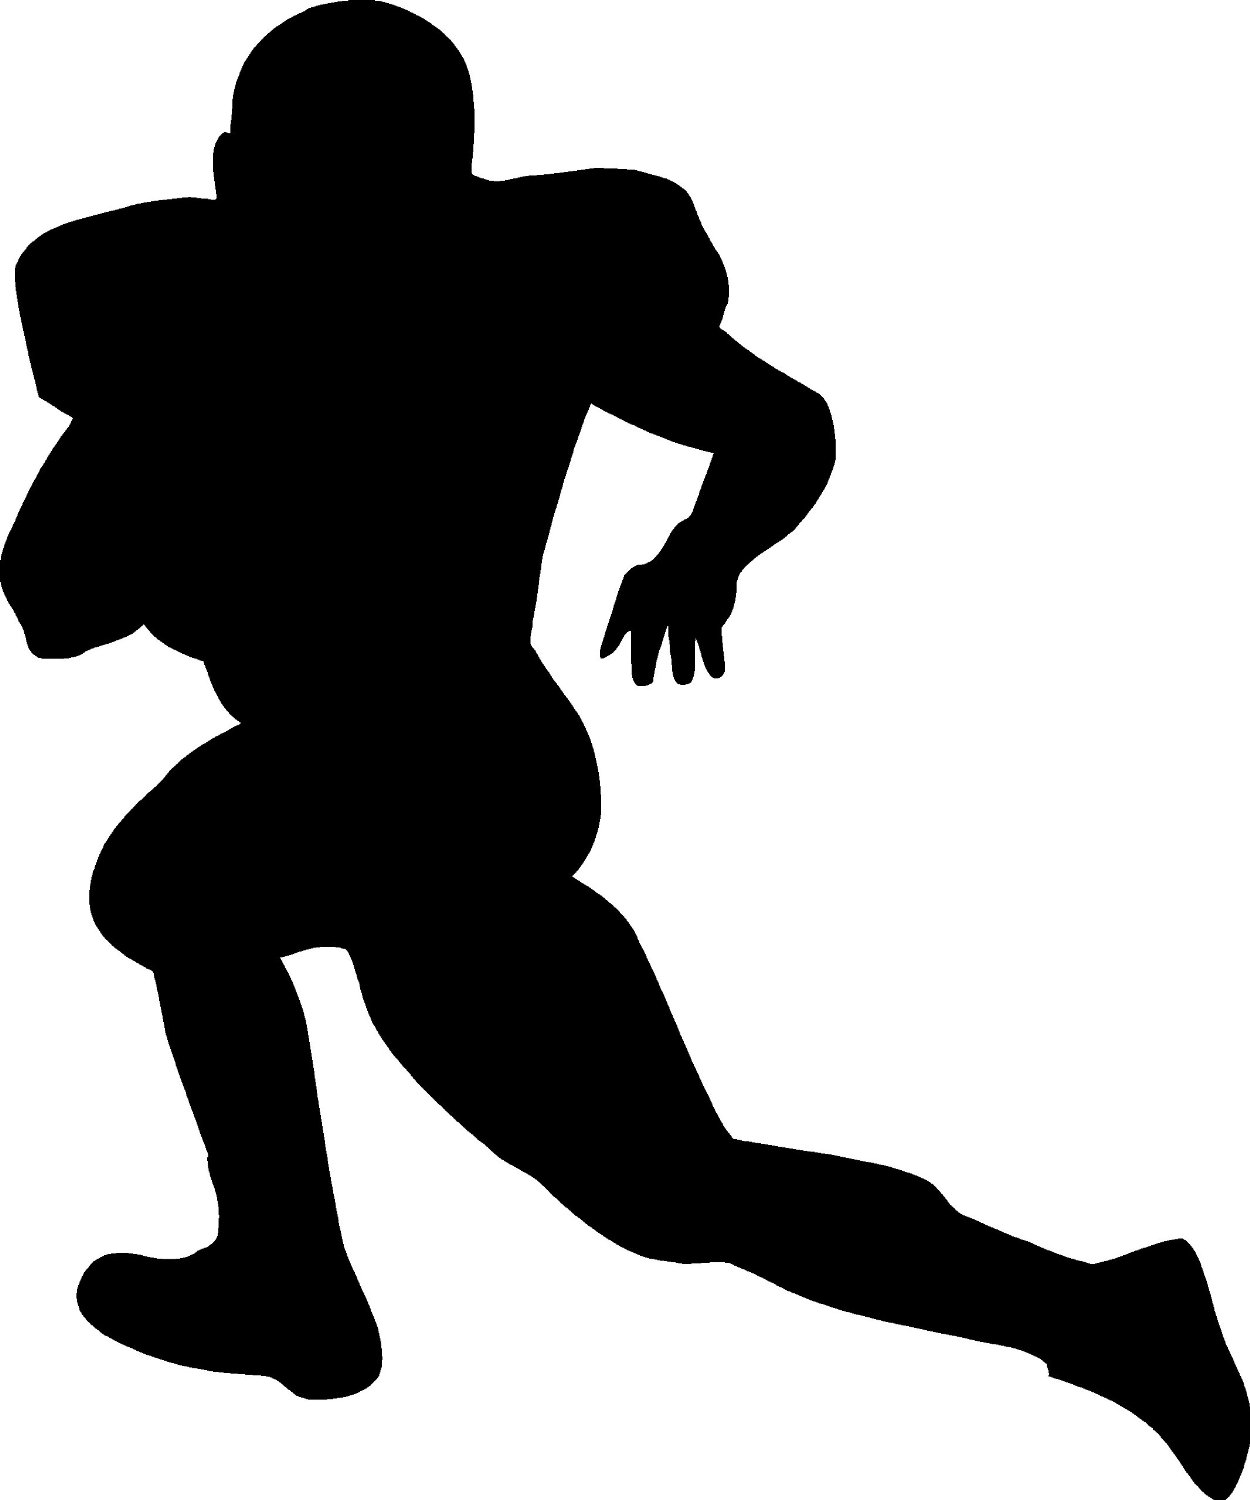 Football Player Silhouette.